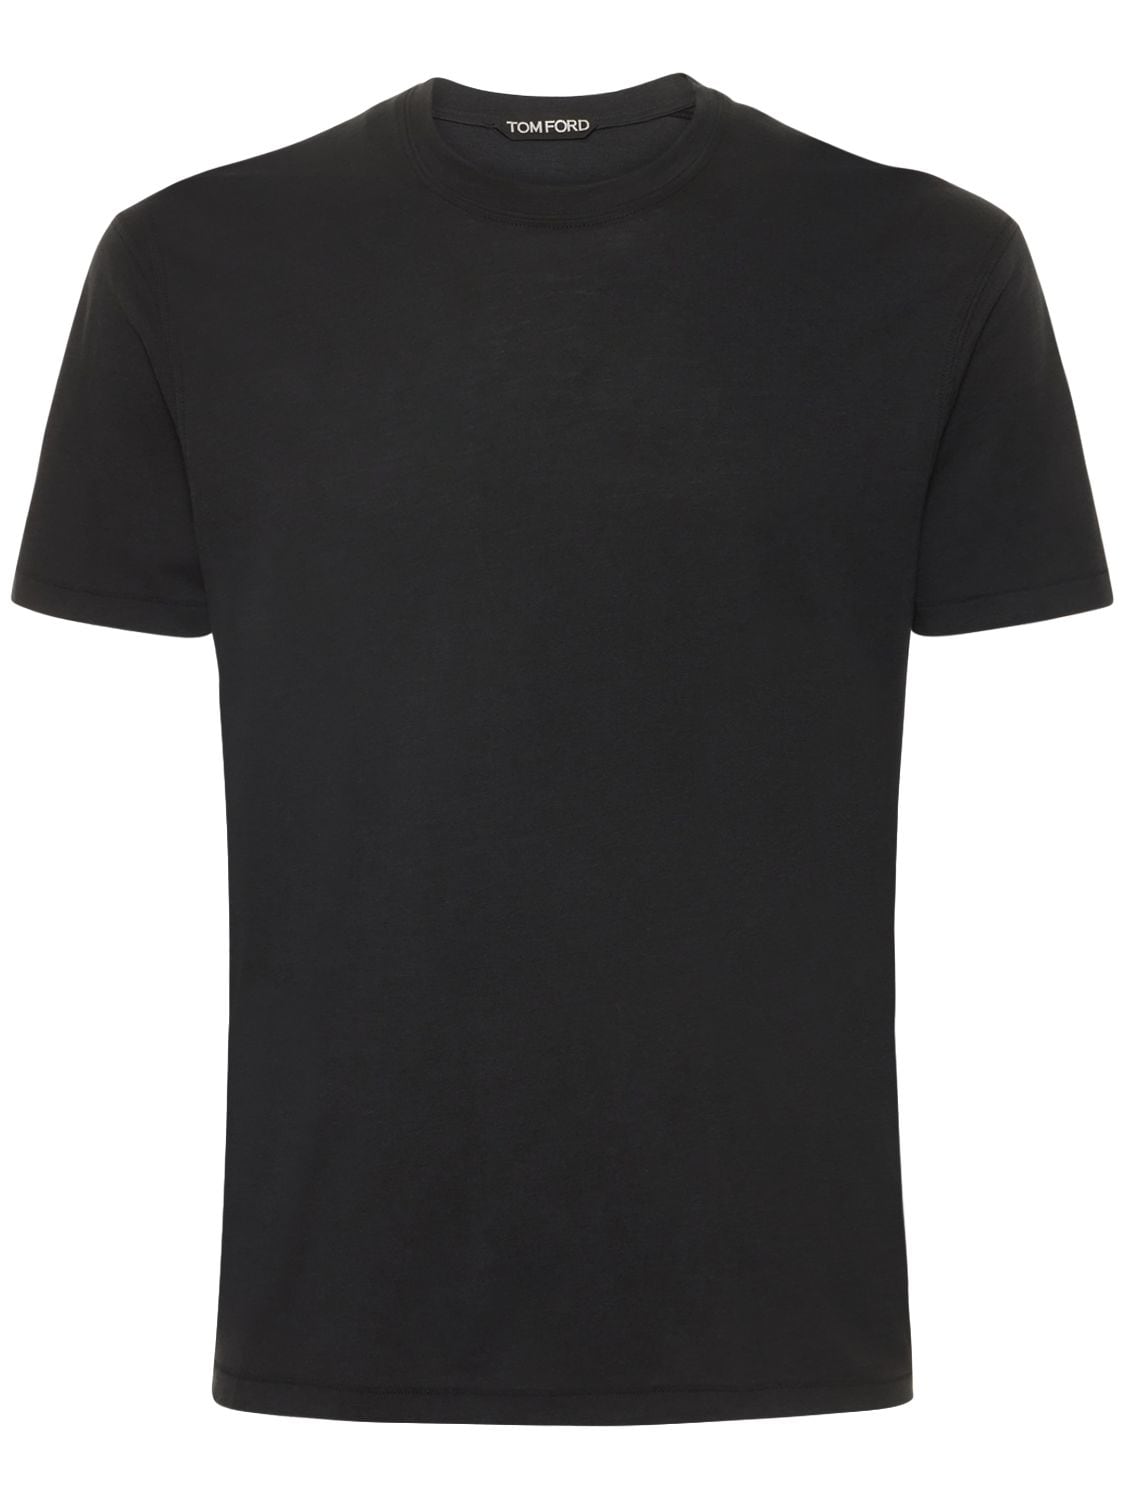 TOM FORD Lyocell & Cotton S/s Crewneck T-shirt